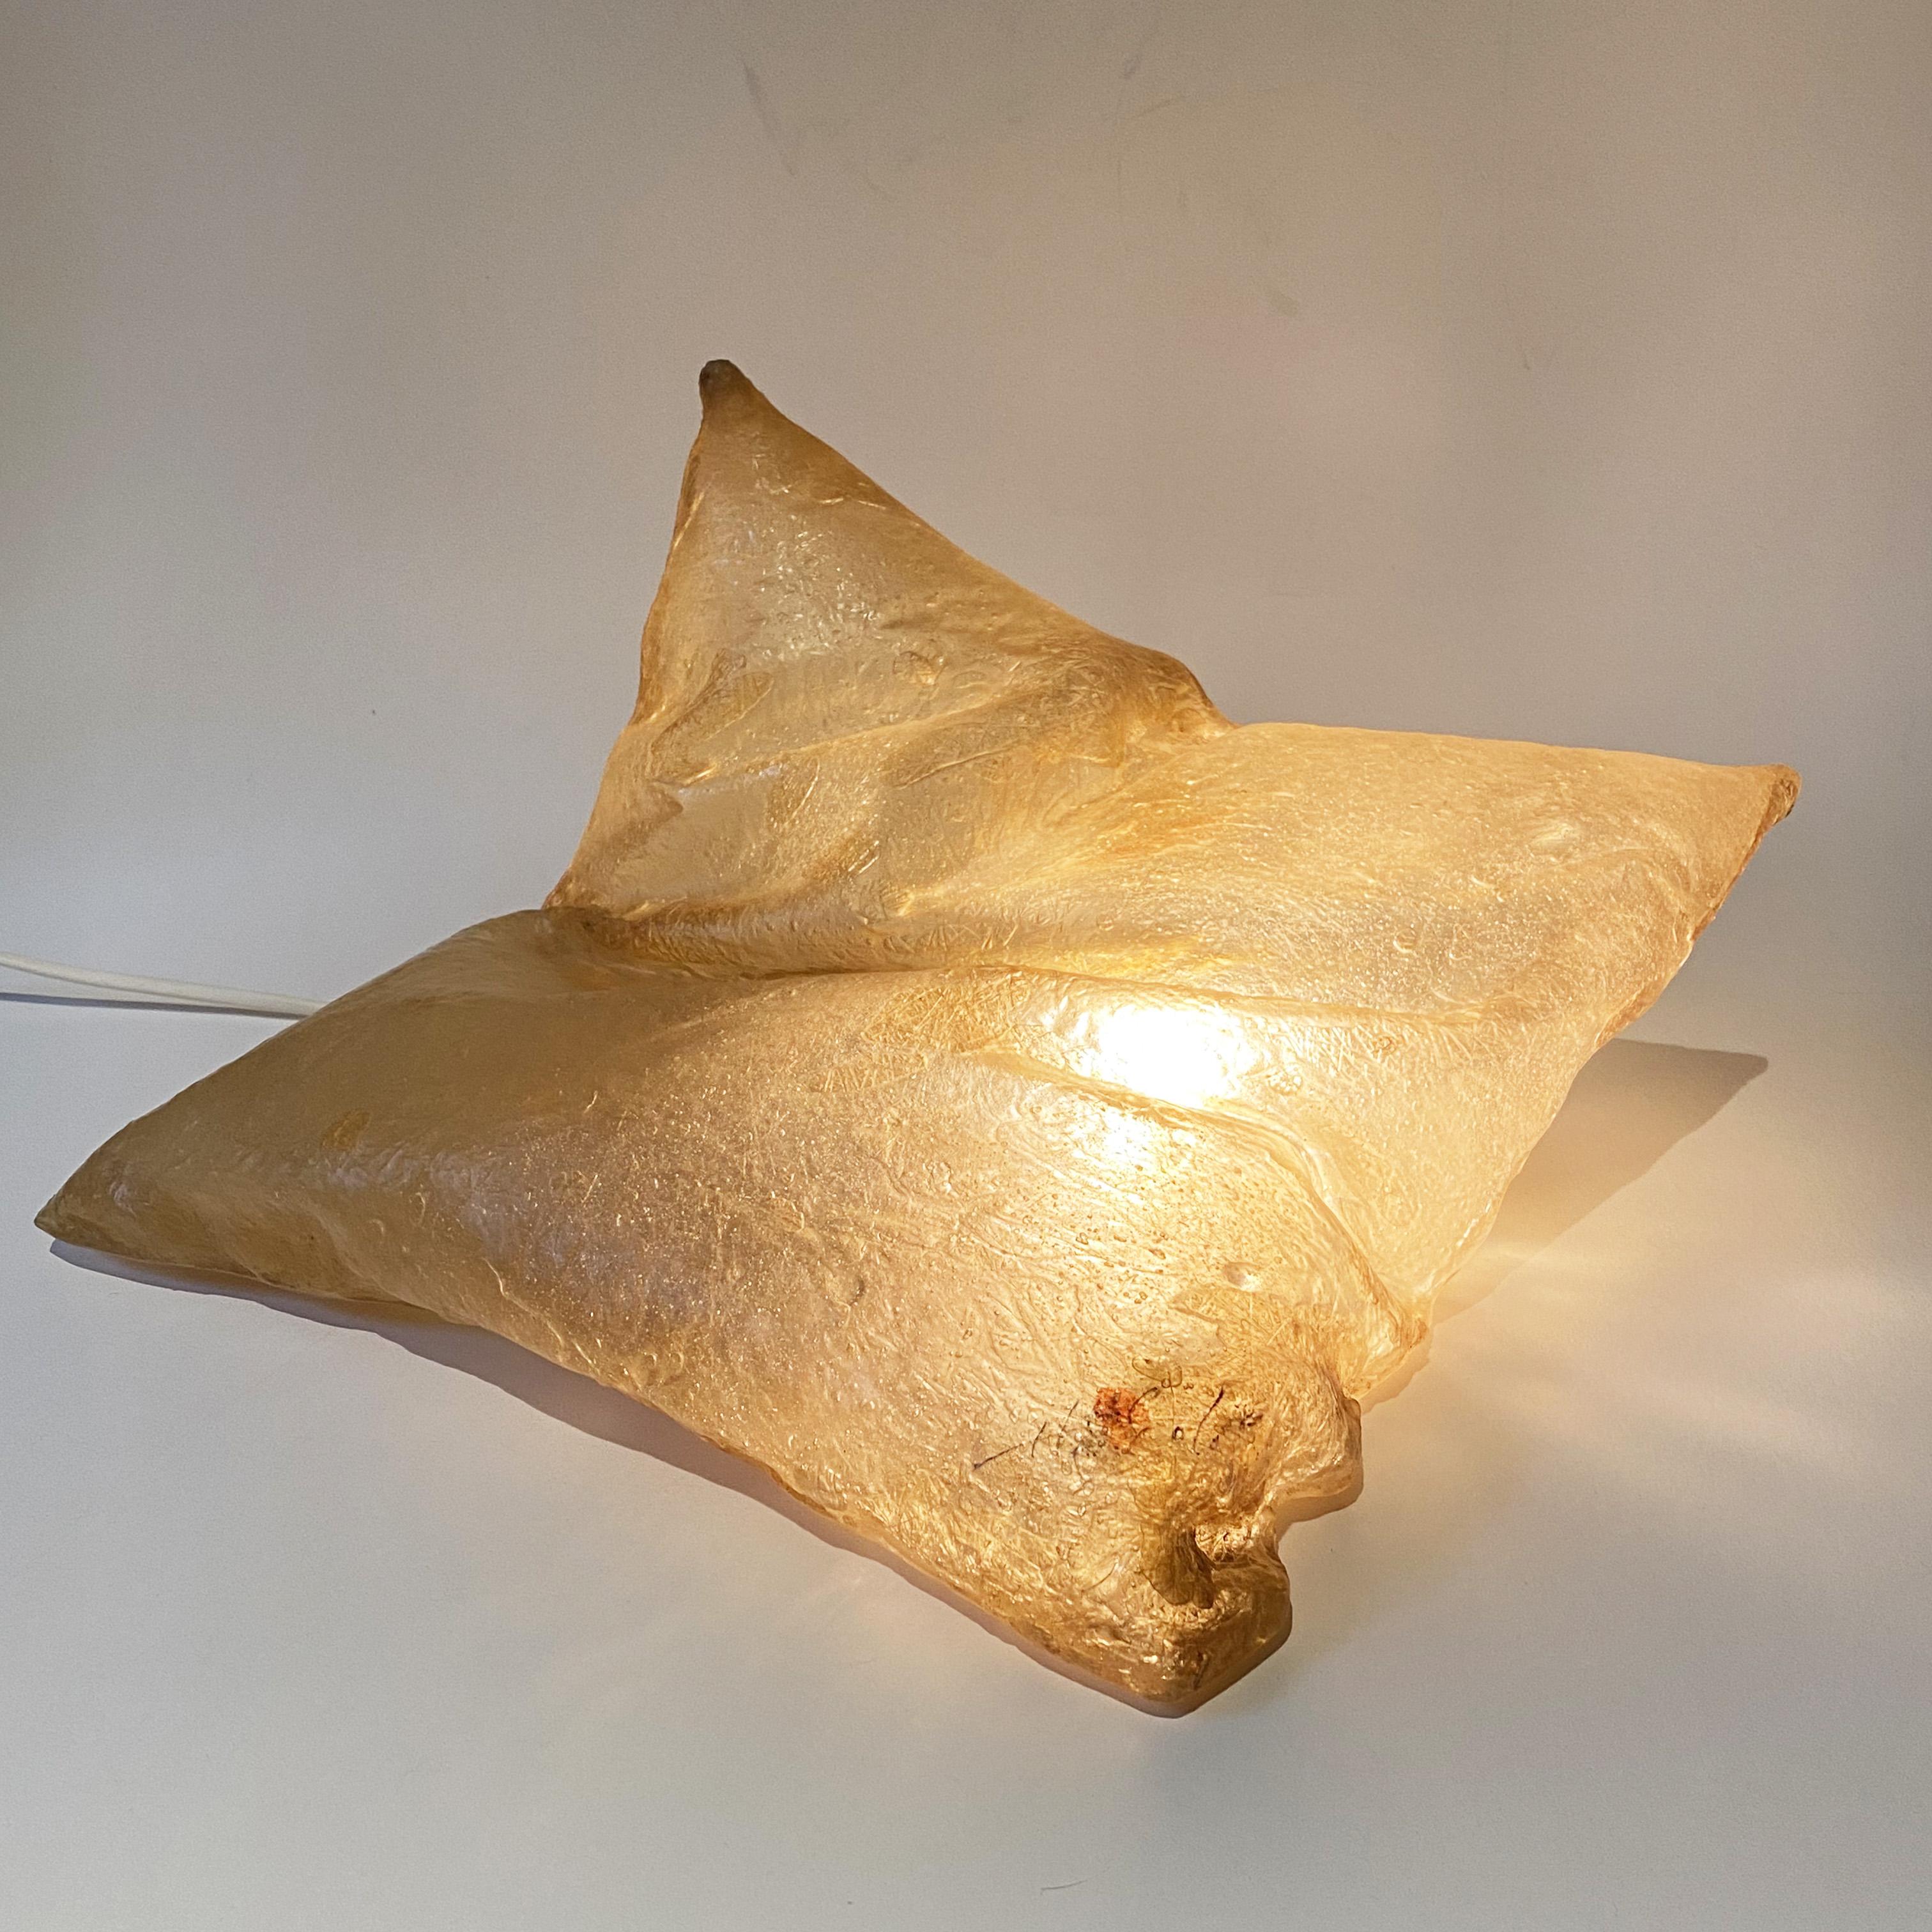 Sculptural Pillow Table Lamp in resin by Hajime Goto, Japan, 1980s.
Very good condition.
